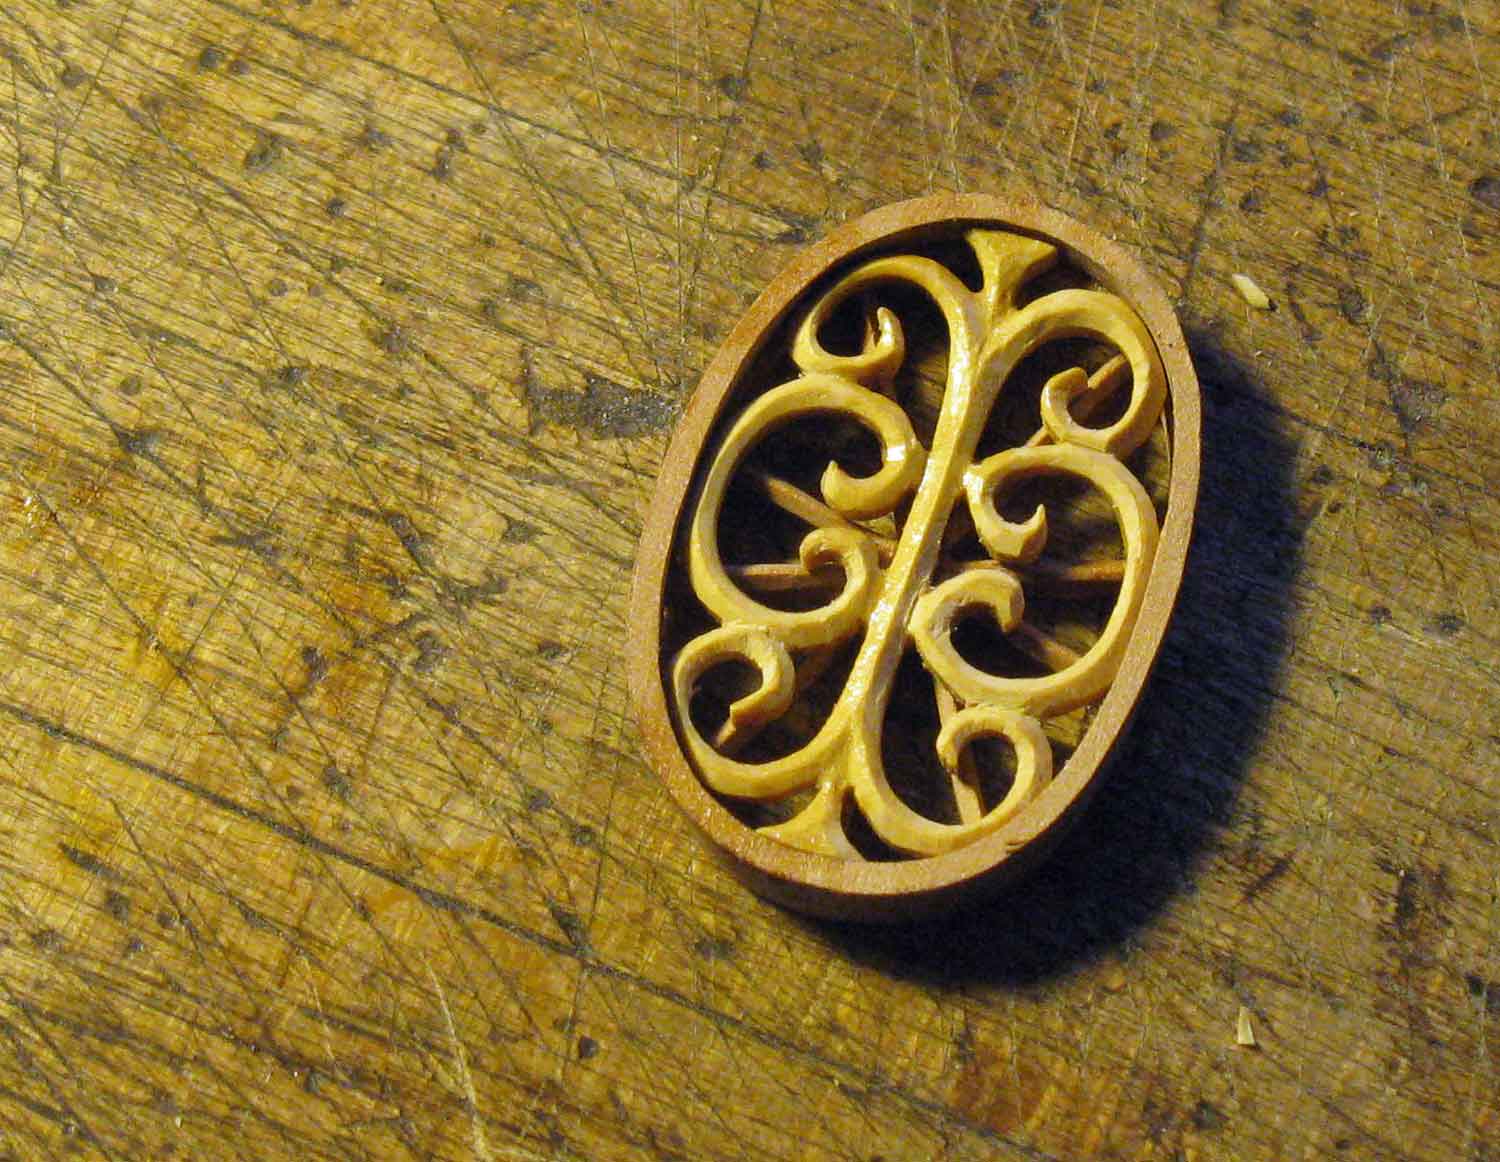 The rosette, ready to inlay